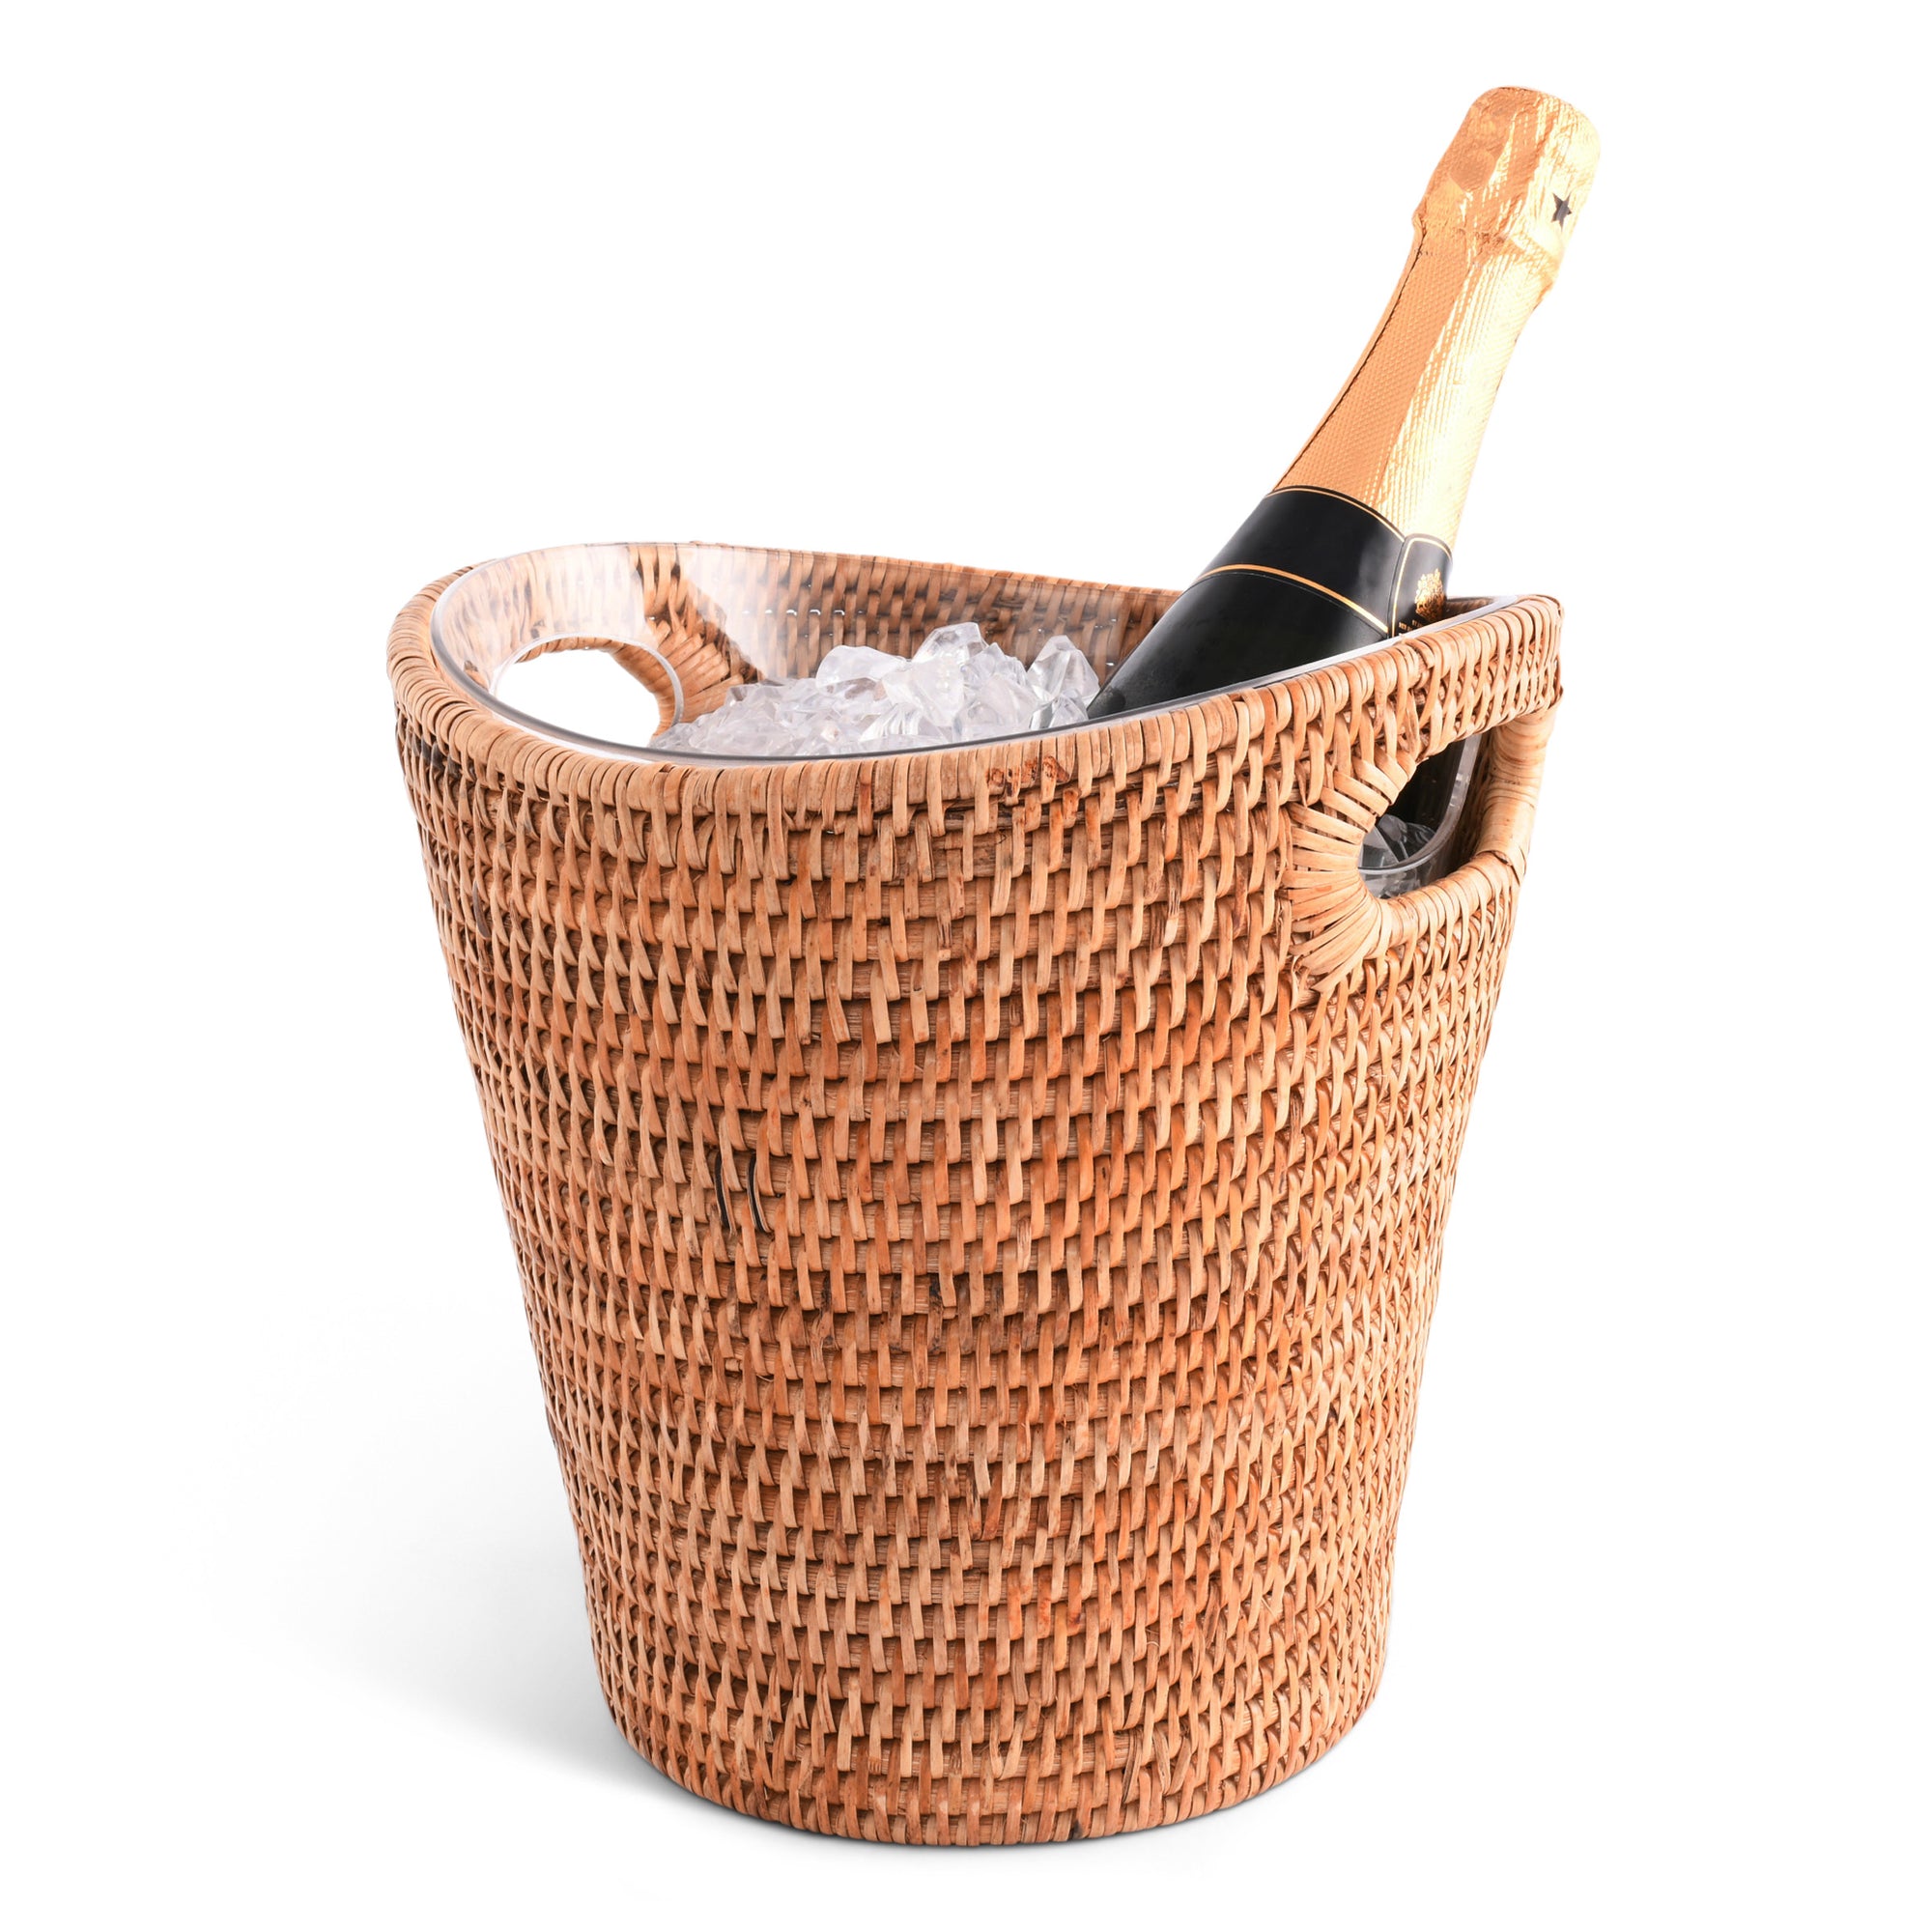 Vagabond House Hand Woven Rattan Wicker Champagne Bucket  / Ice Bucket Product Image